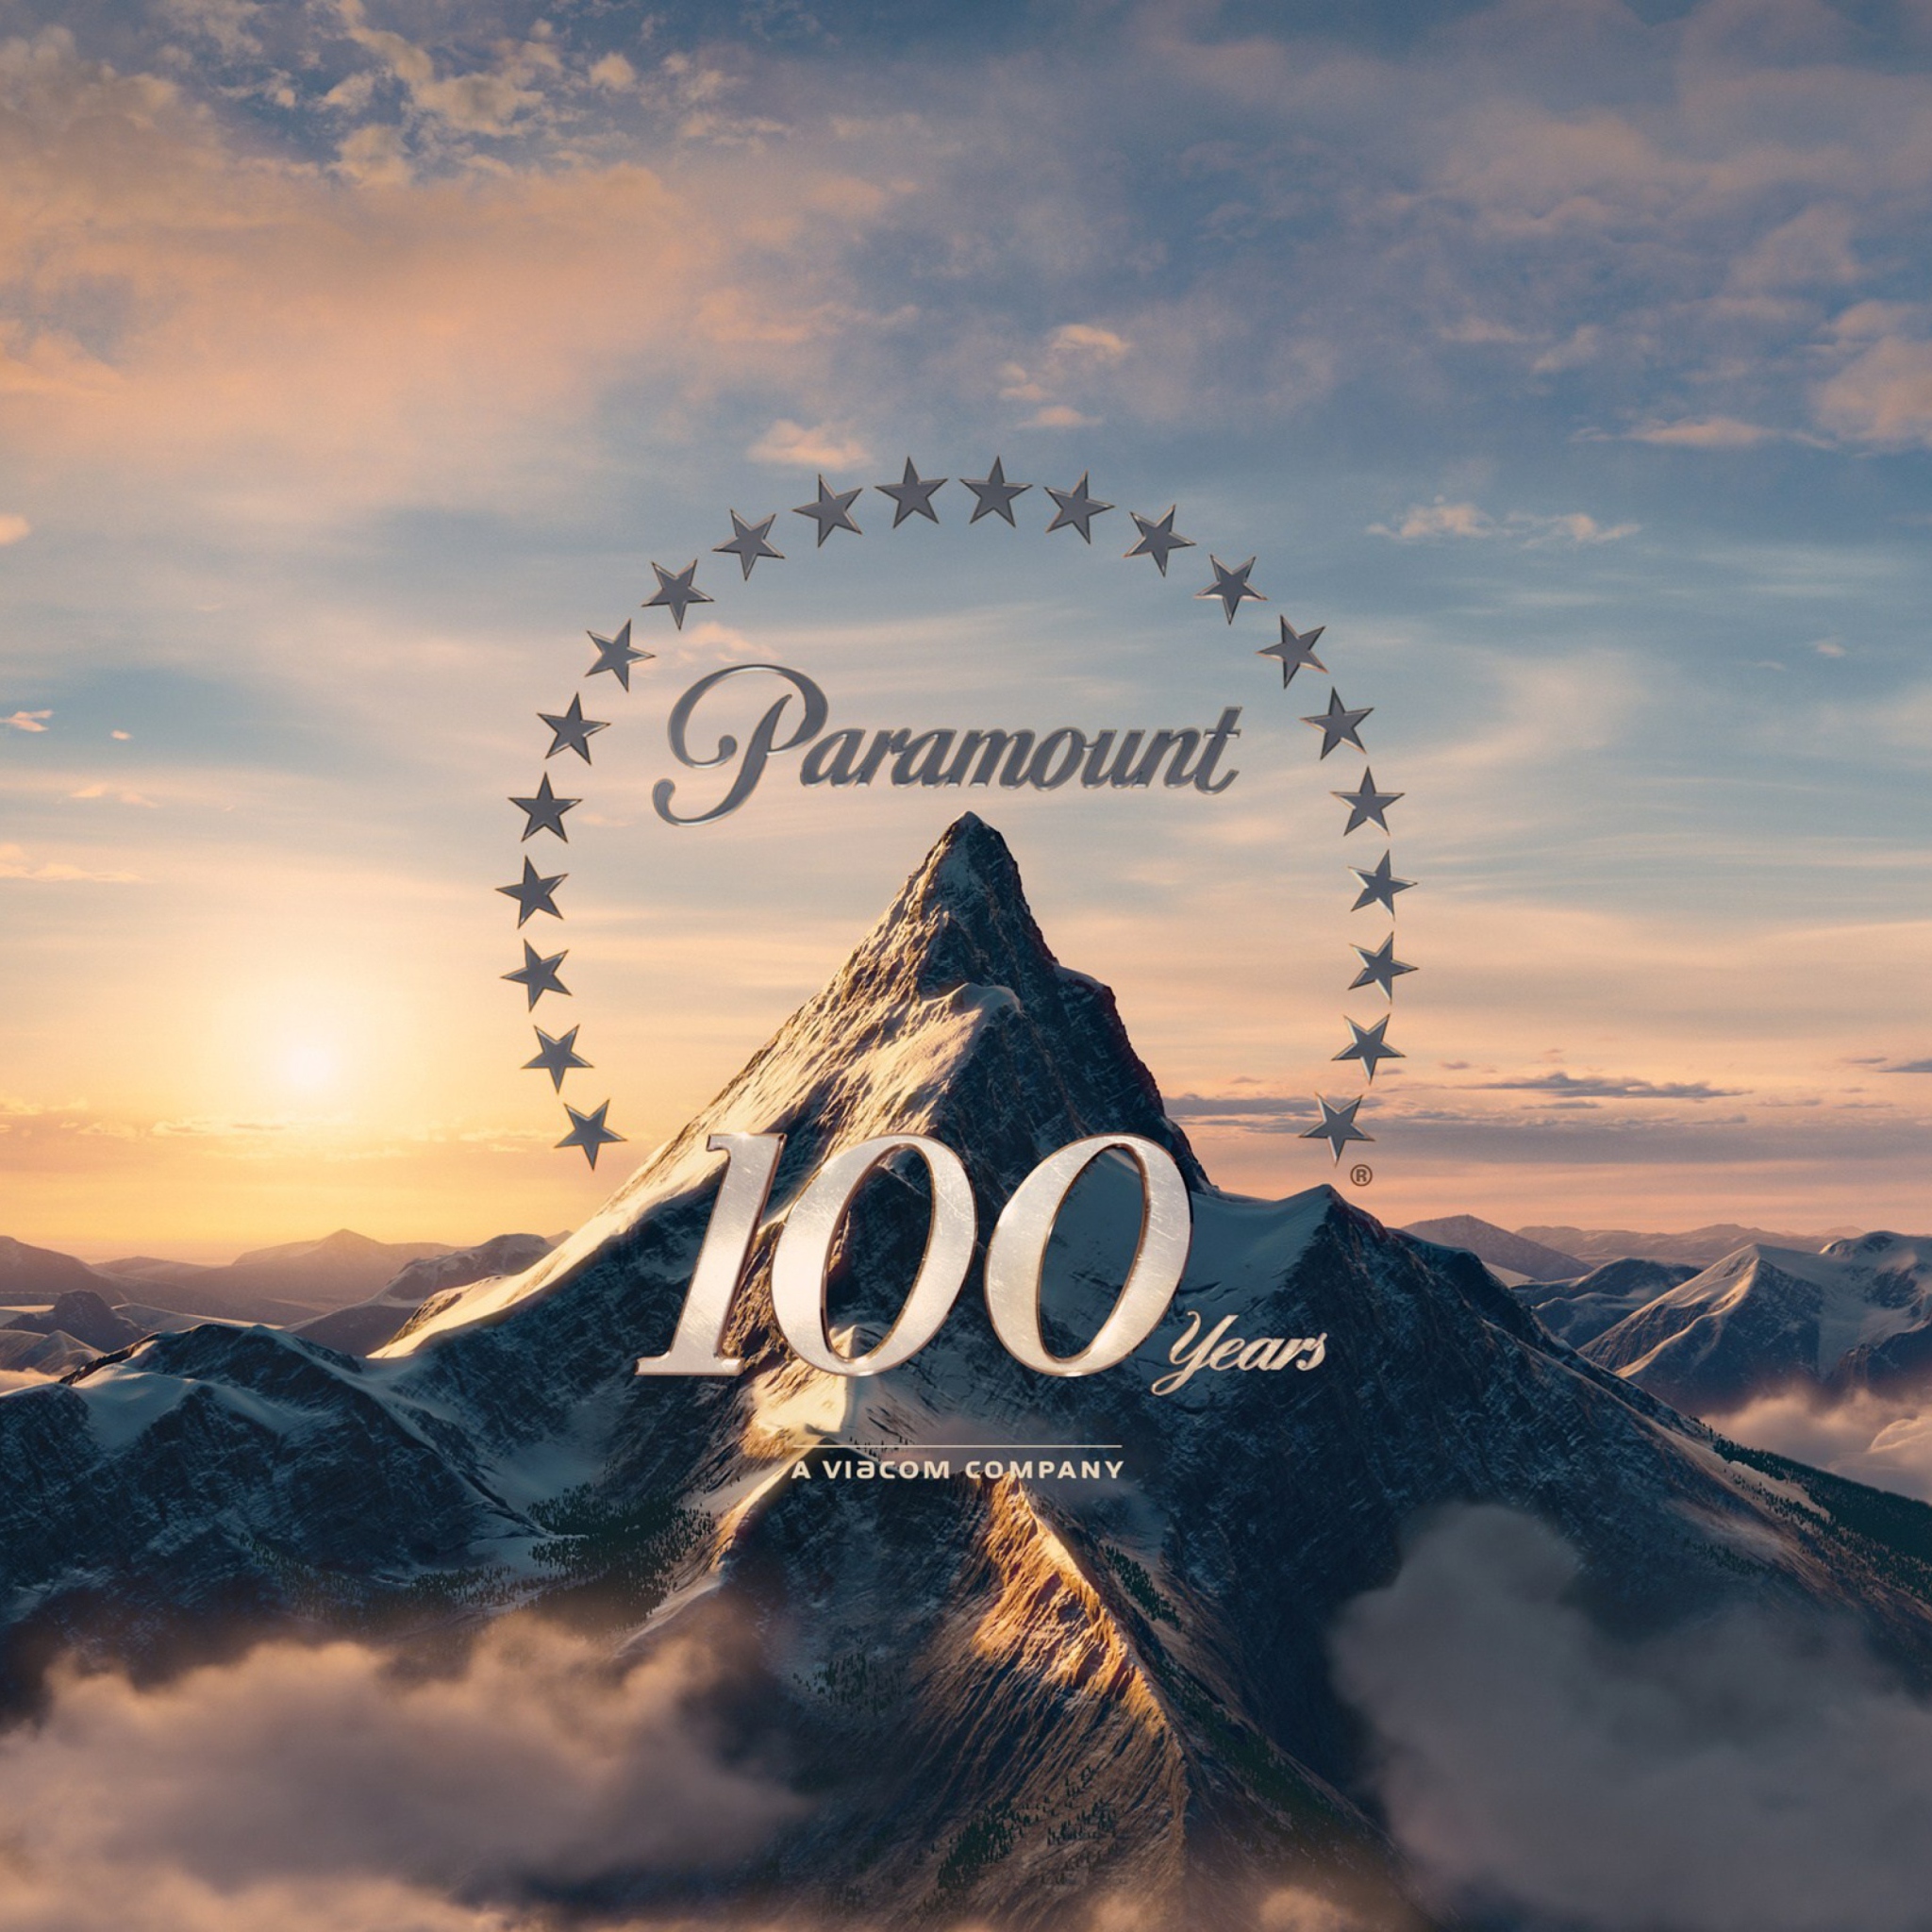 Paramount Pictures 100 Years screenshot #1 2048x2048